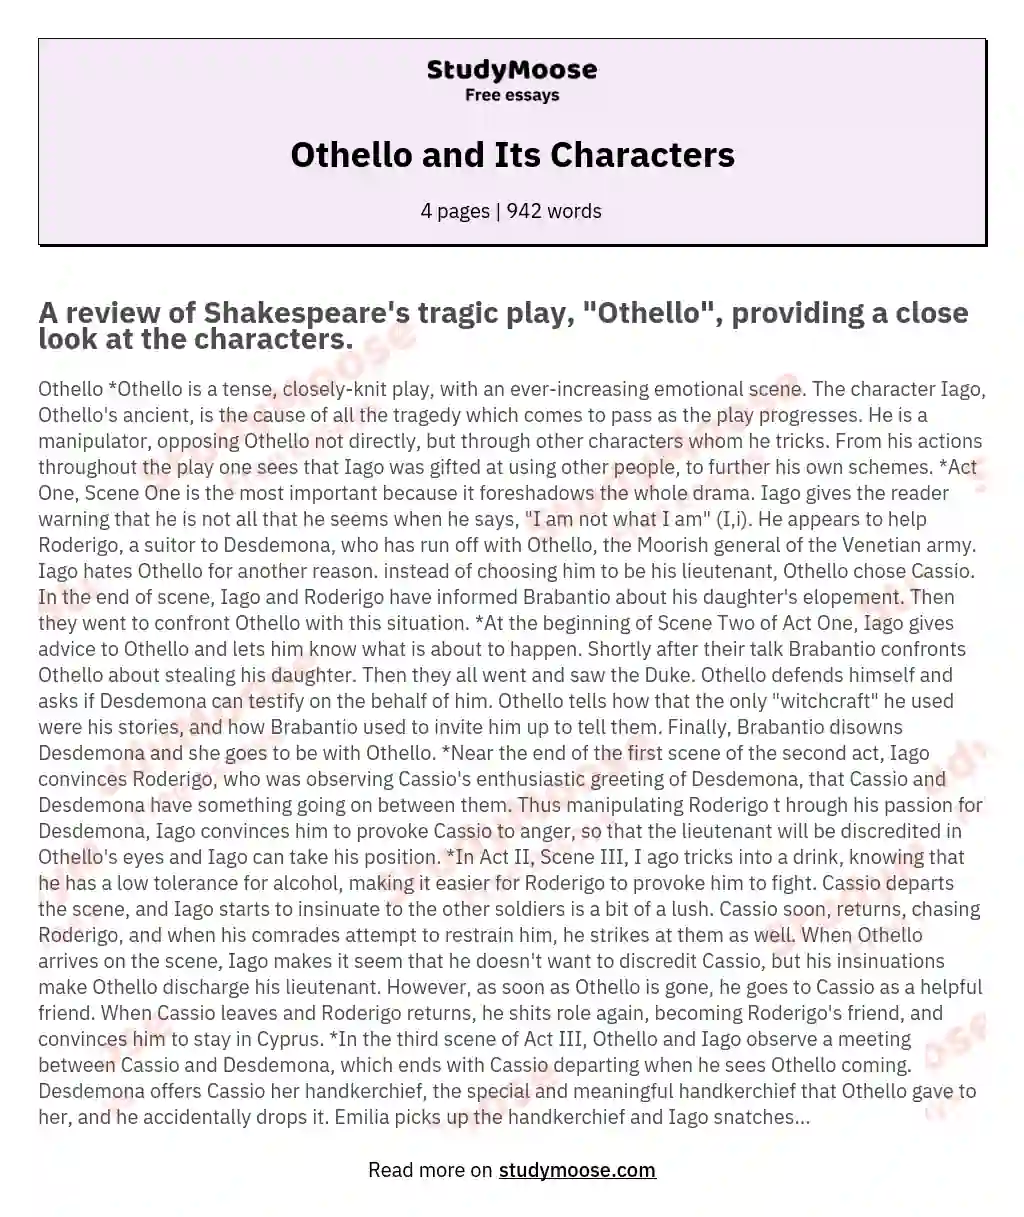 Othello and Its Characters essay